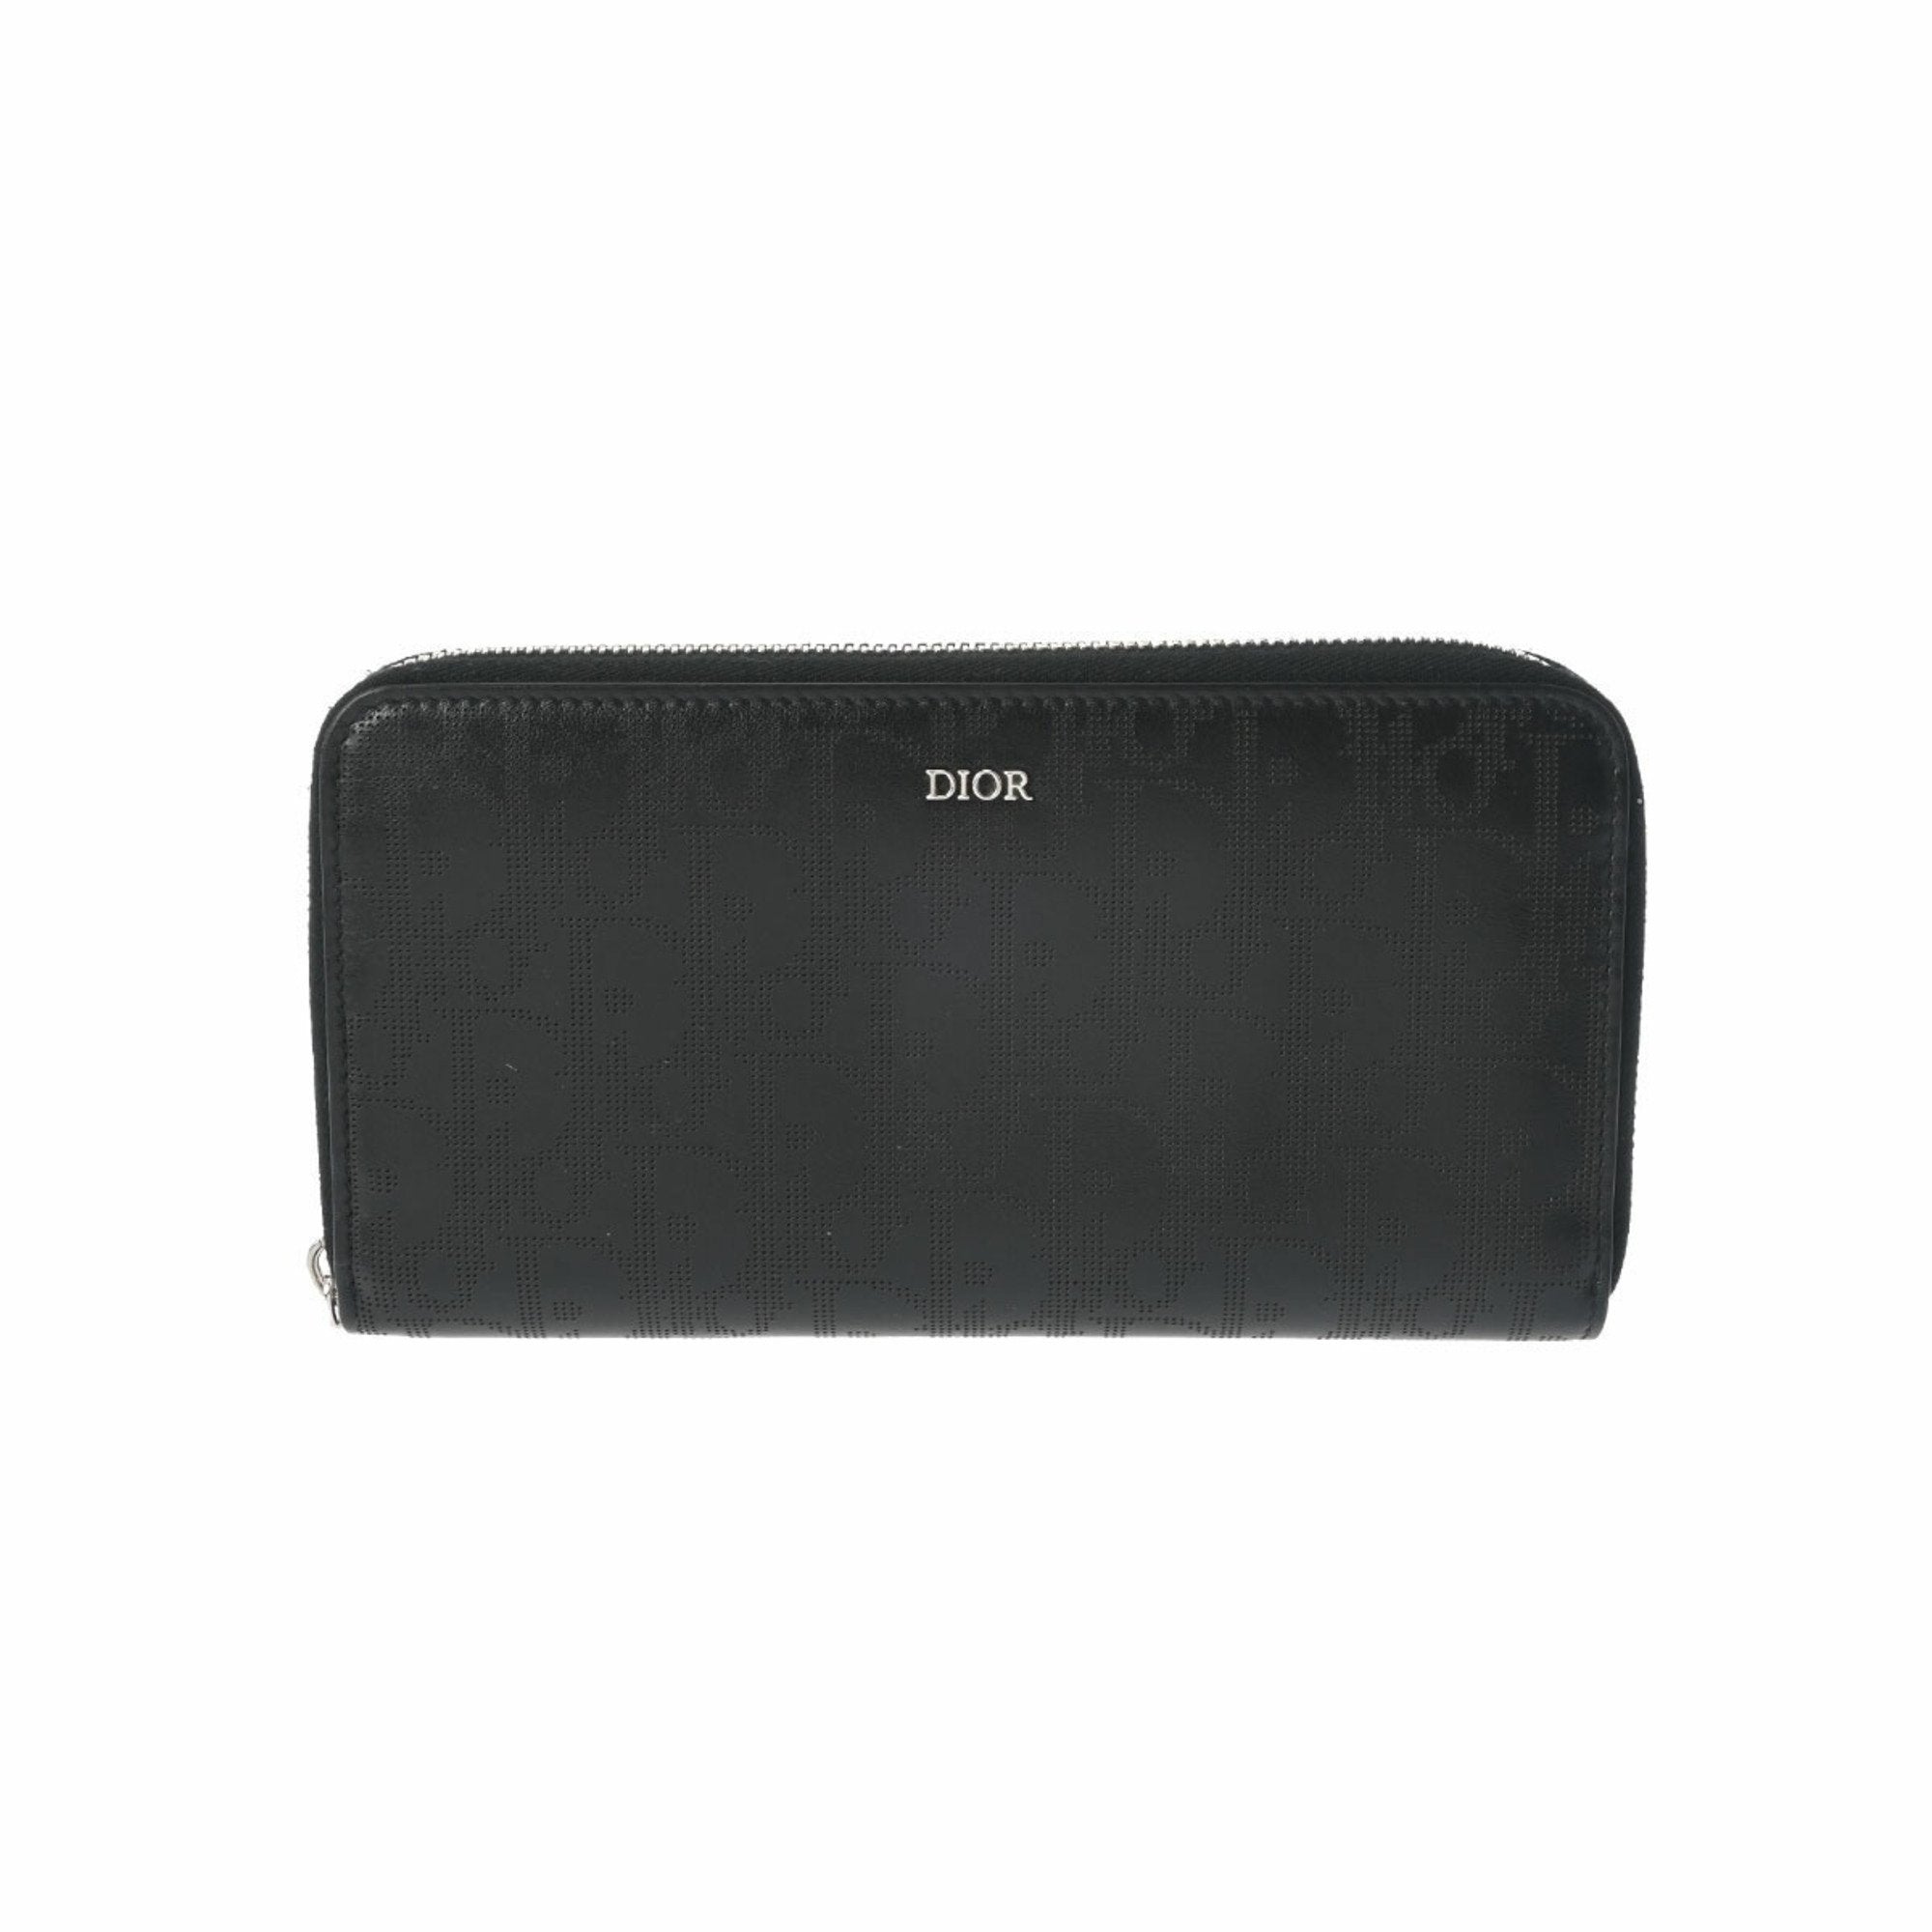 HOMME Round Zip Long Wallet Black Men's Perforated Leather